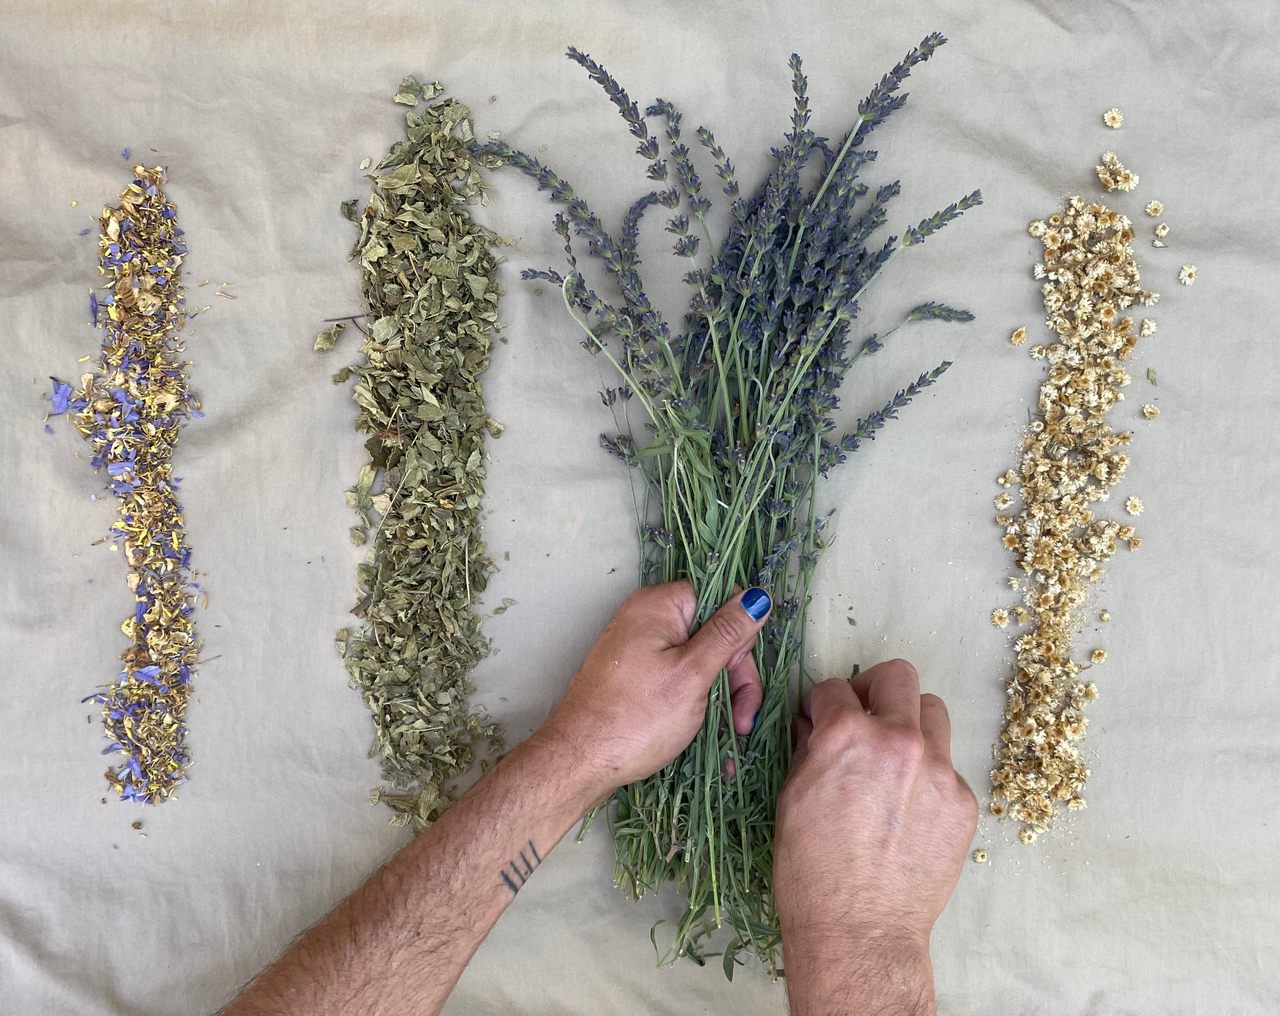 David Shorter prepares herbs from his garden to make tinctures. From left to right: blue lily flowers, calea zacatechichi, lavender, and gordolobo.